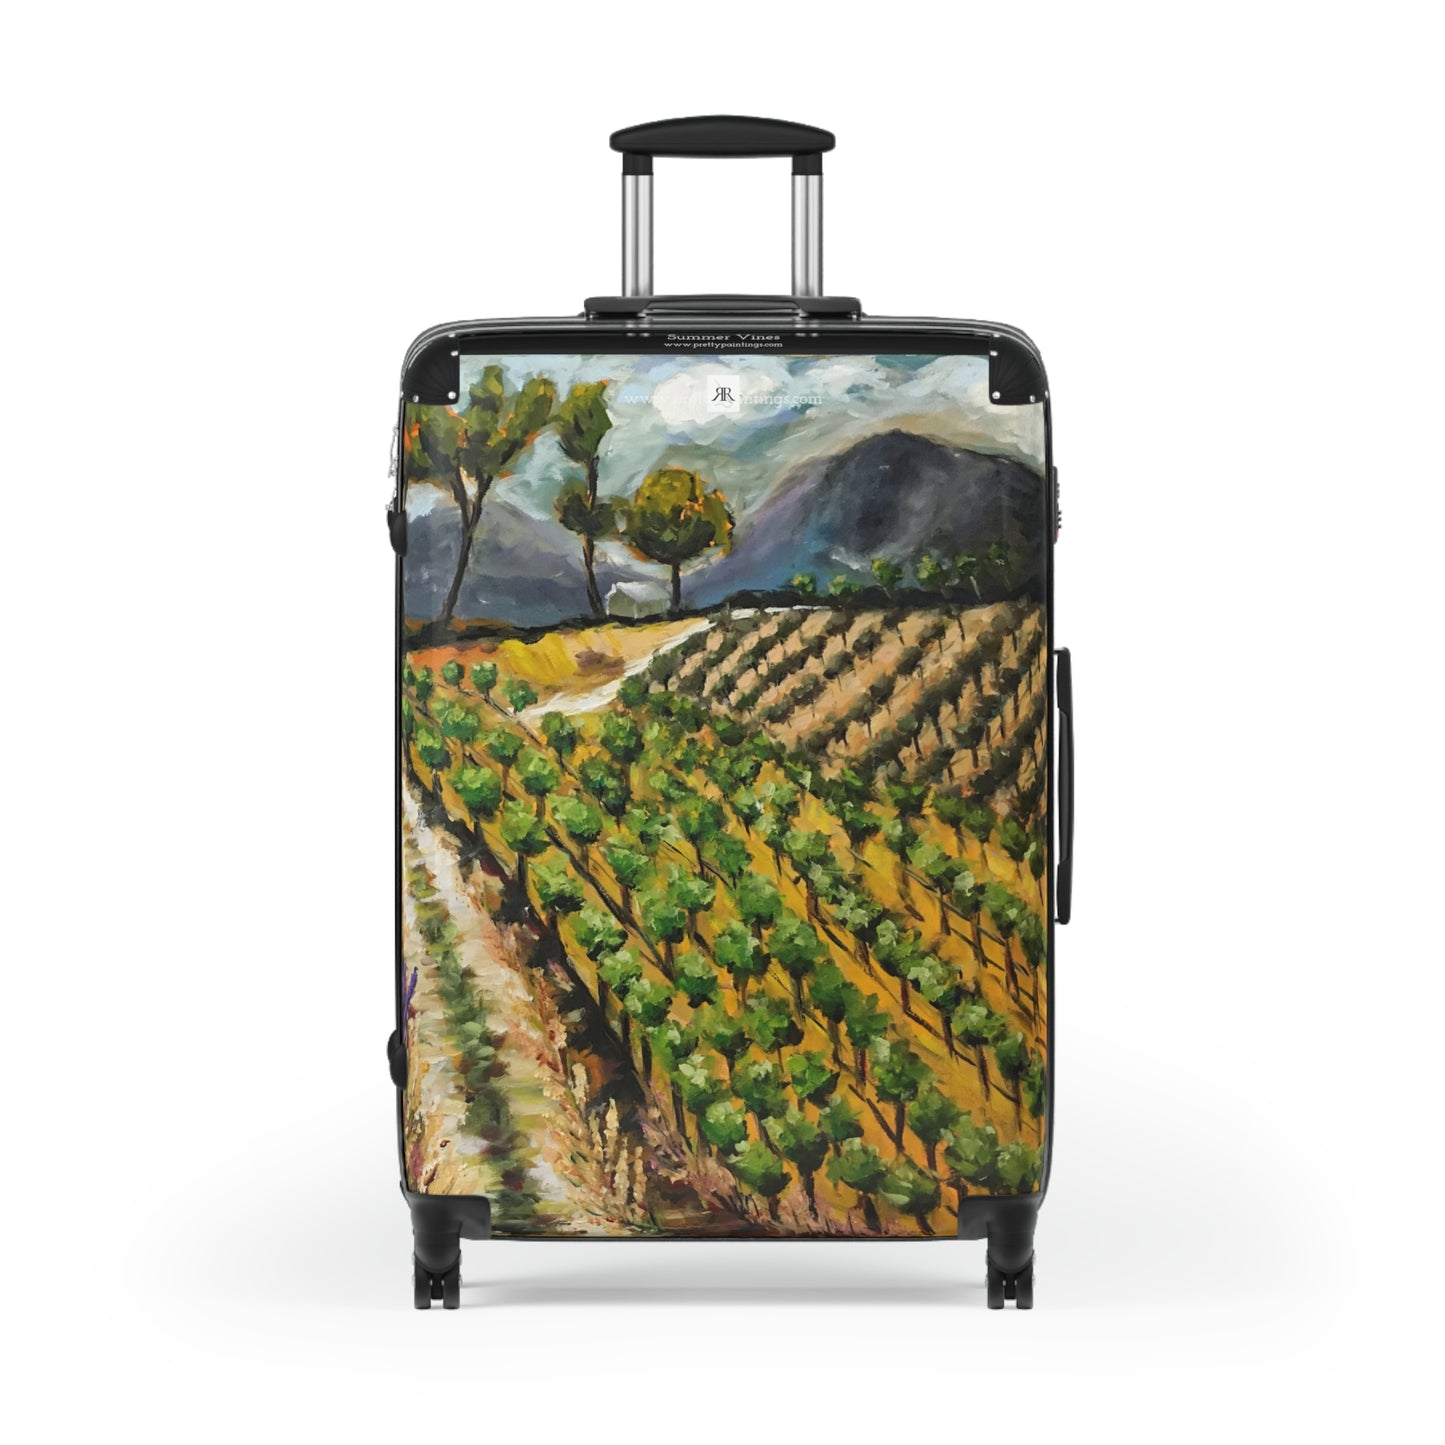 "Summer Vines" Carry on Suitcase (three sizes)